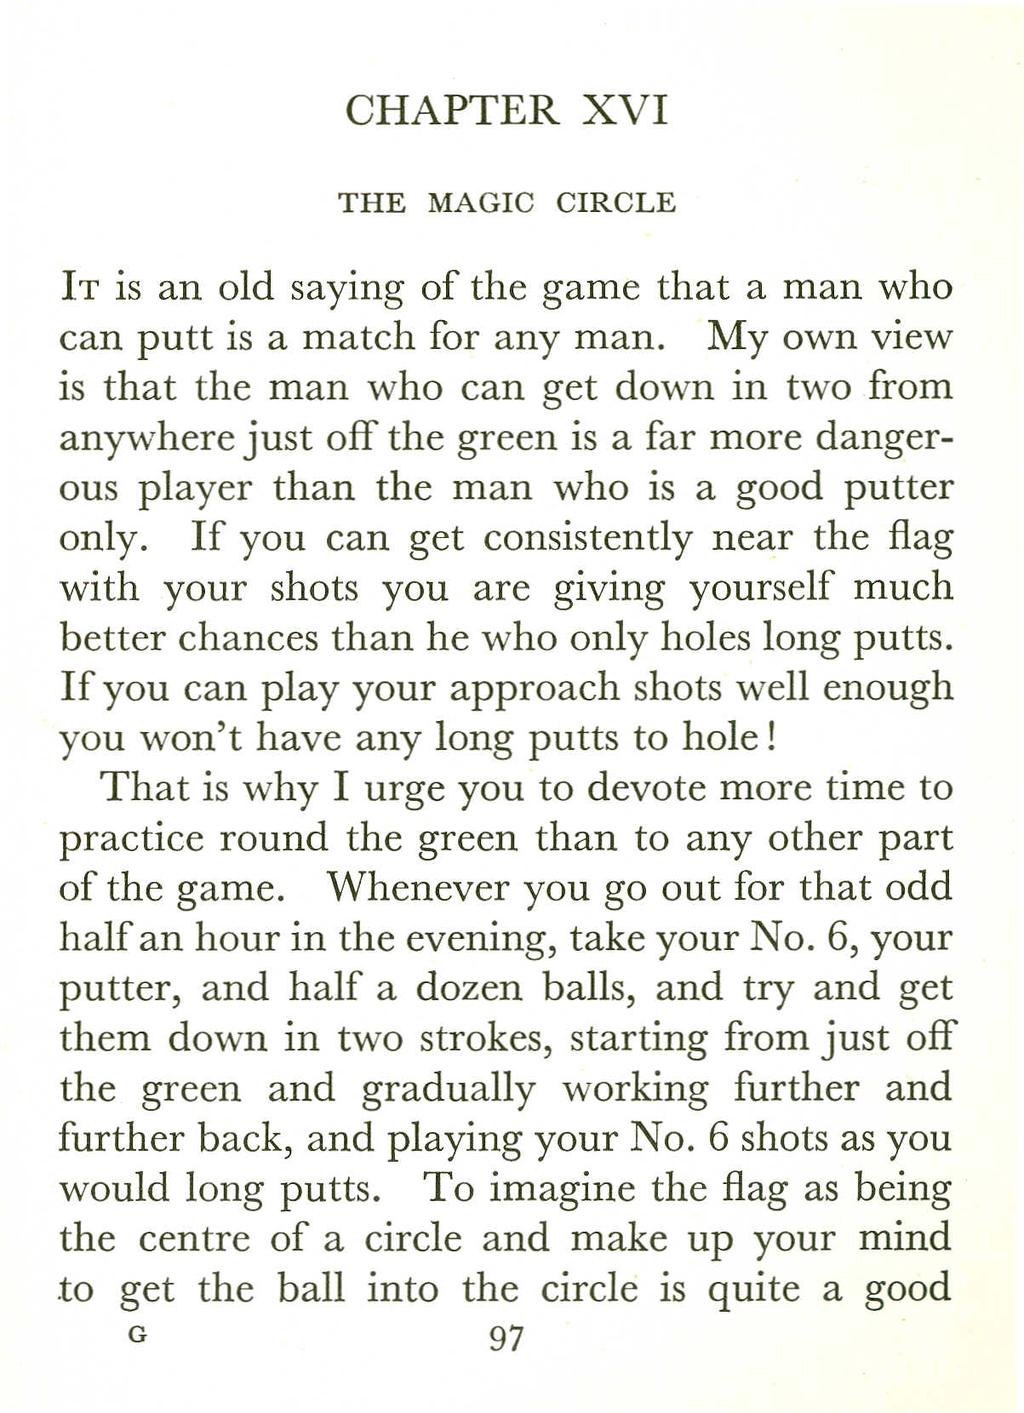 IT is an old saying of the game that a man who can putt is a match for any man.